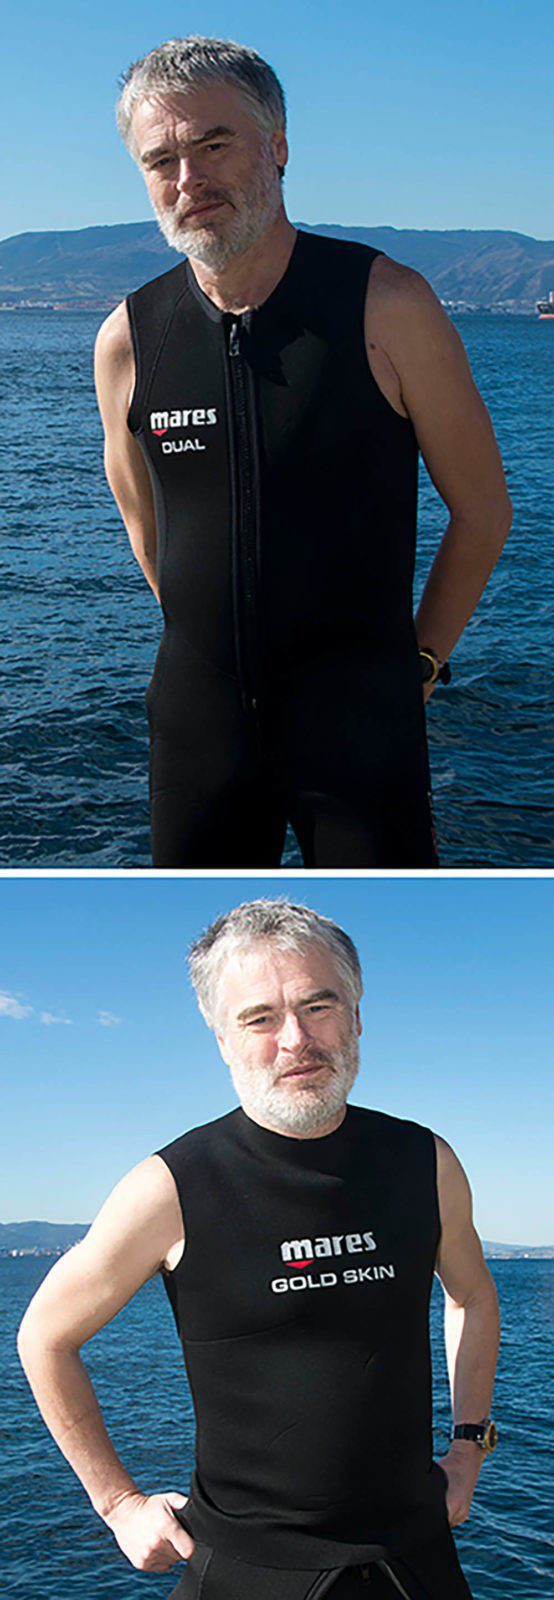 Top: The Dual long-john. Above: The Gold Skin vest.